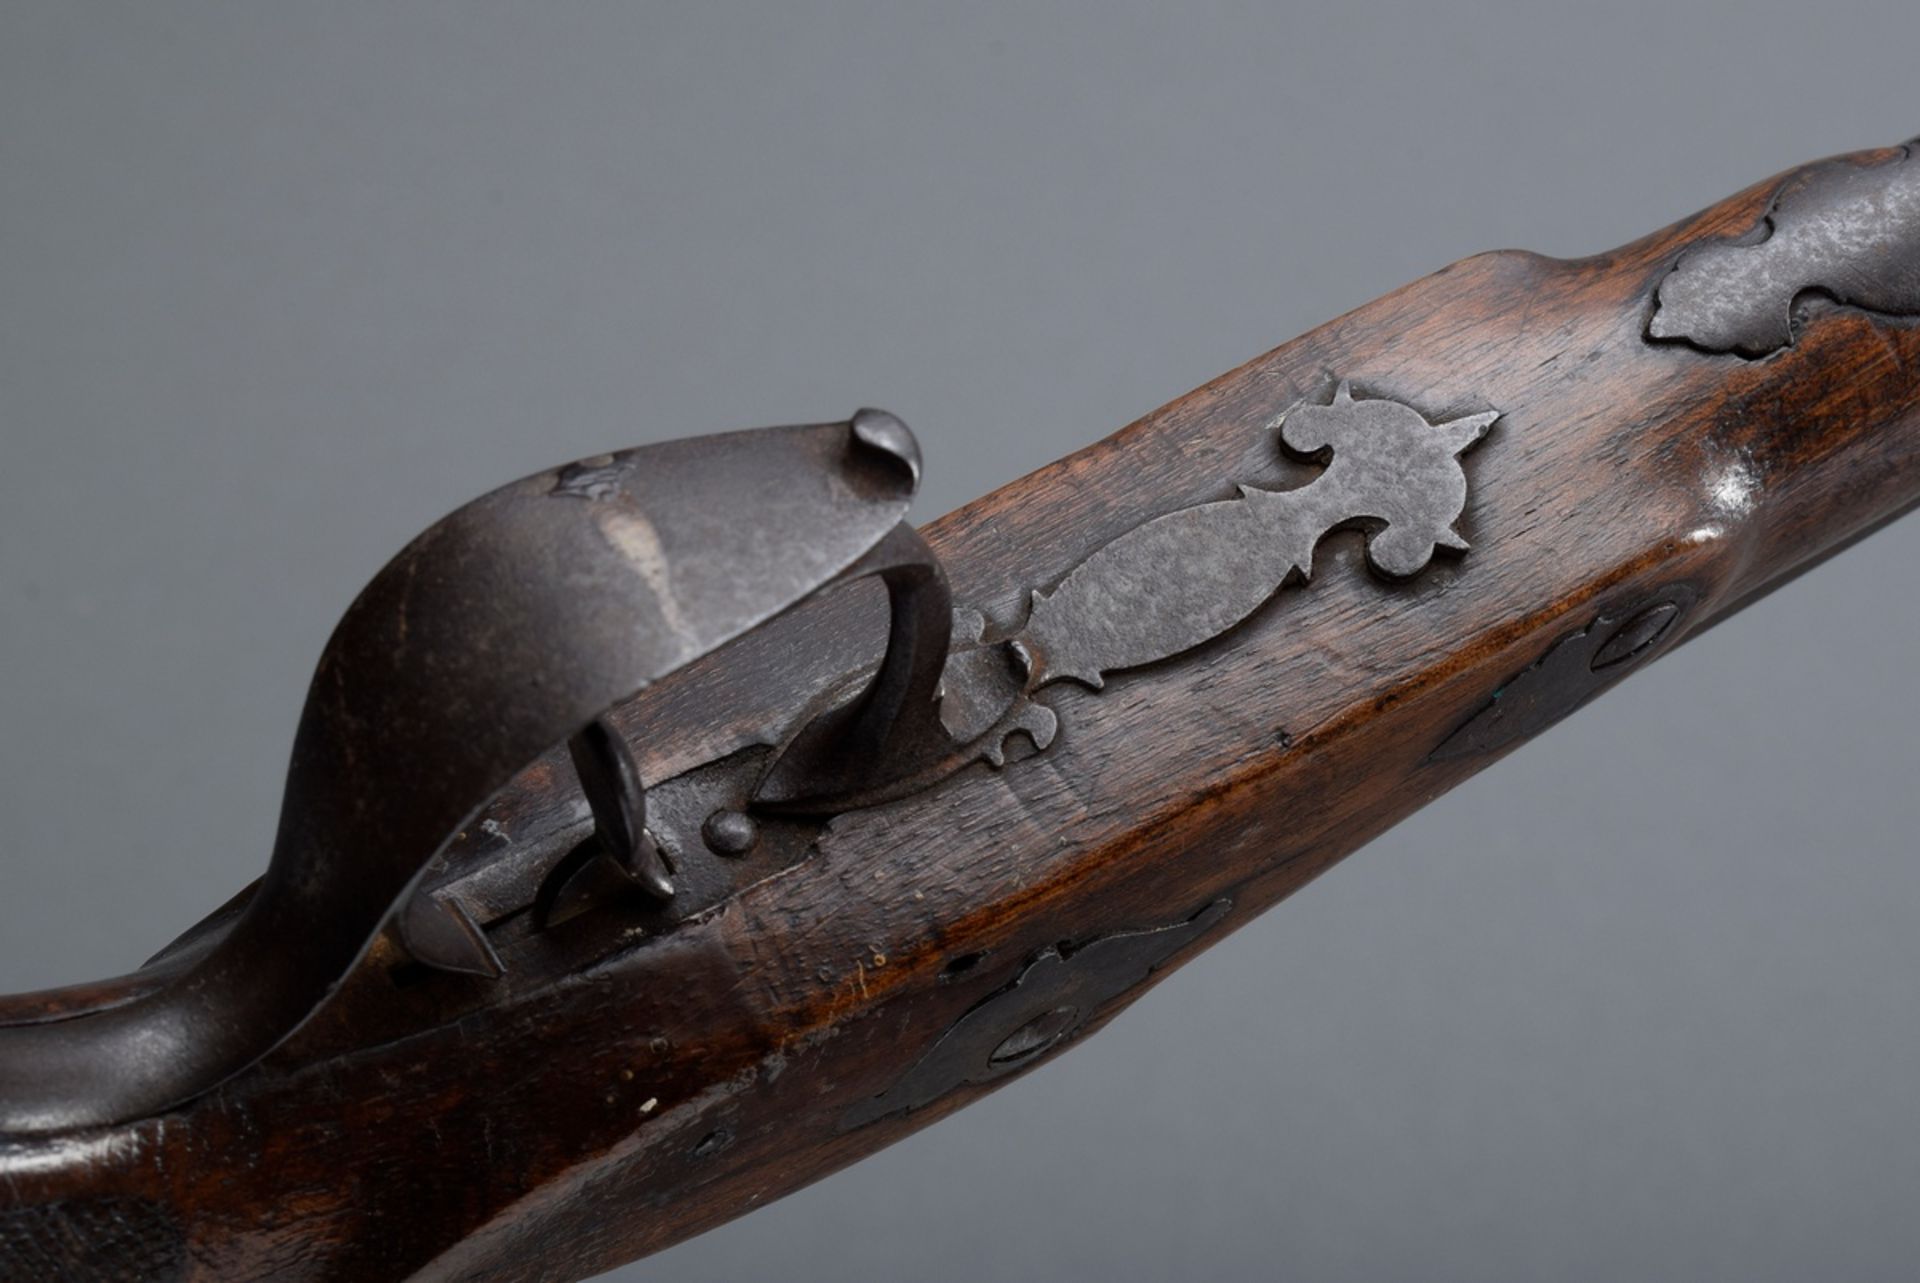 Antike Vorderladerpistole mit Percussionsschloss | Antique muzzle-loading pistol with percussion lo - Image 5 of 11